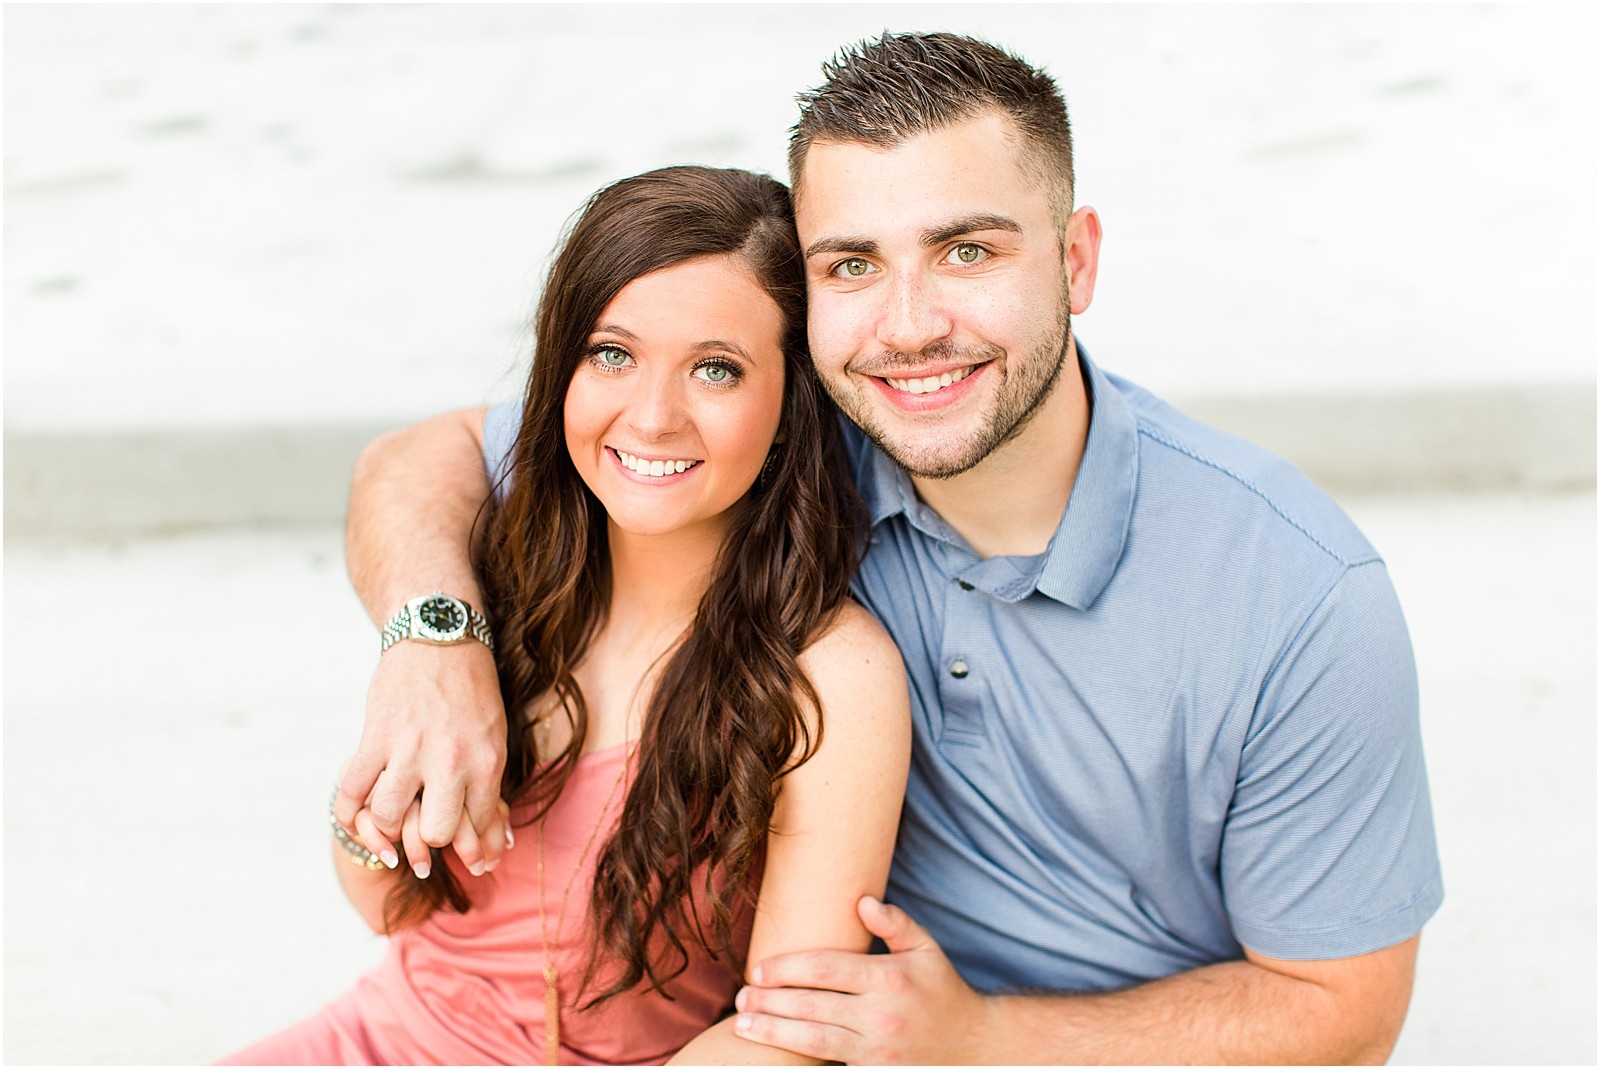 Downtown Newburgh Engagement Session | Matt and Blaire | Bret and Brandie Photography030.jpg